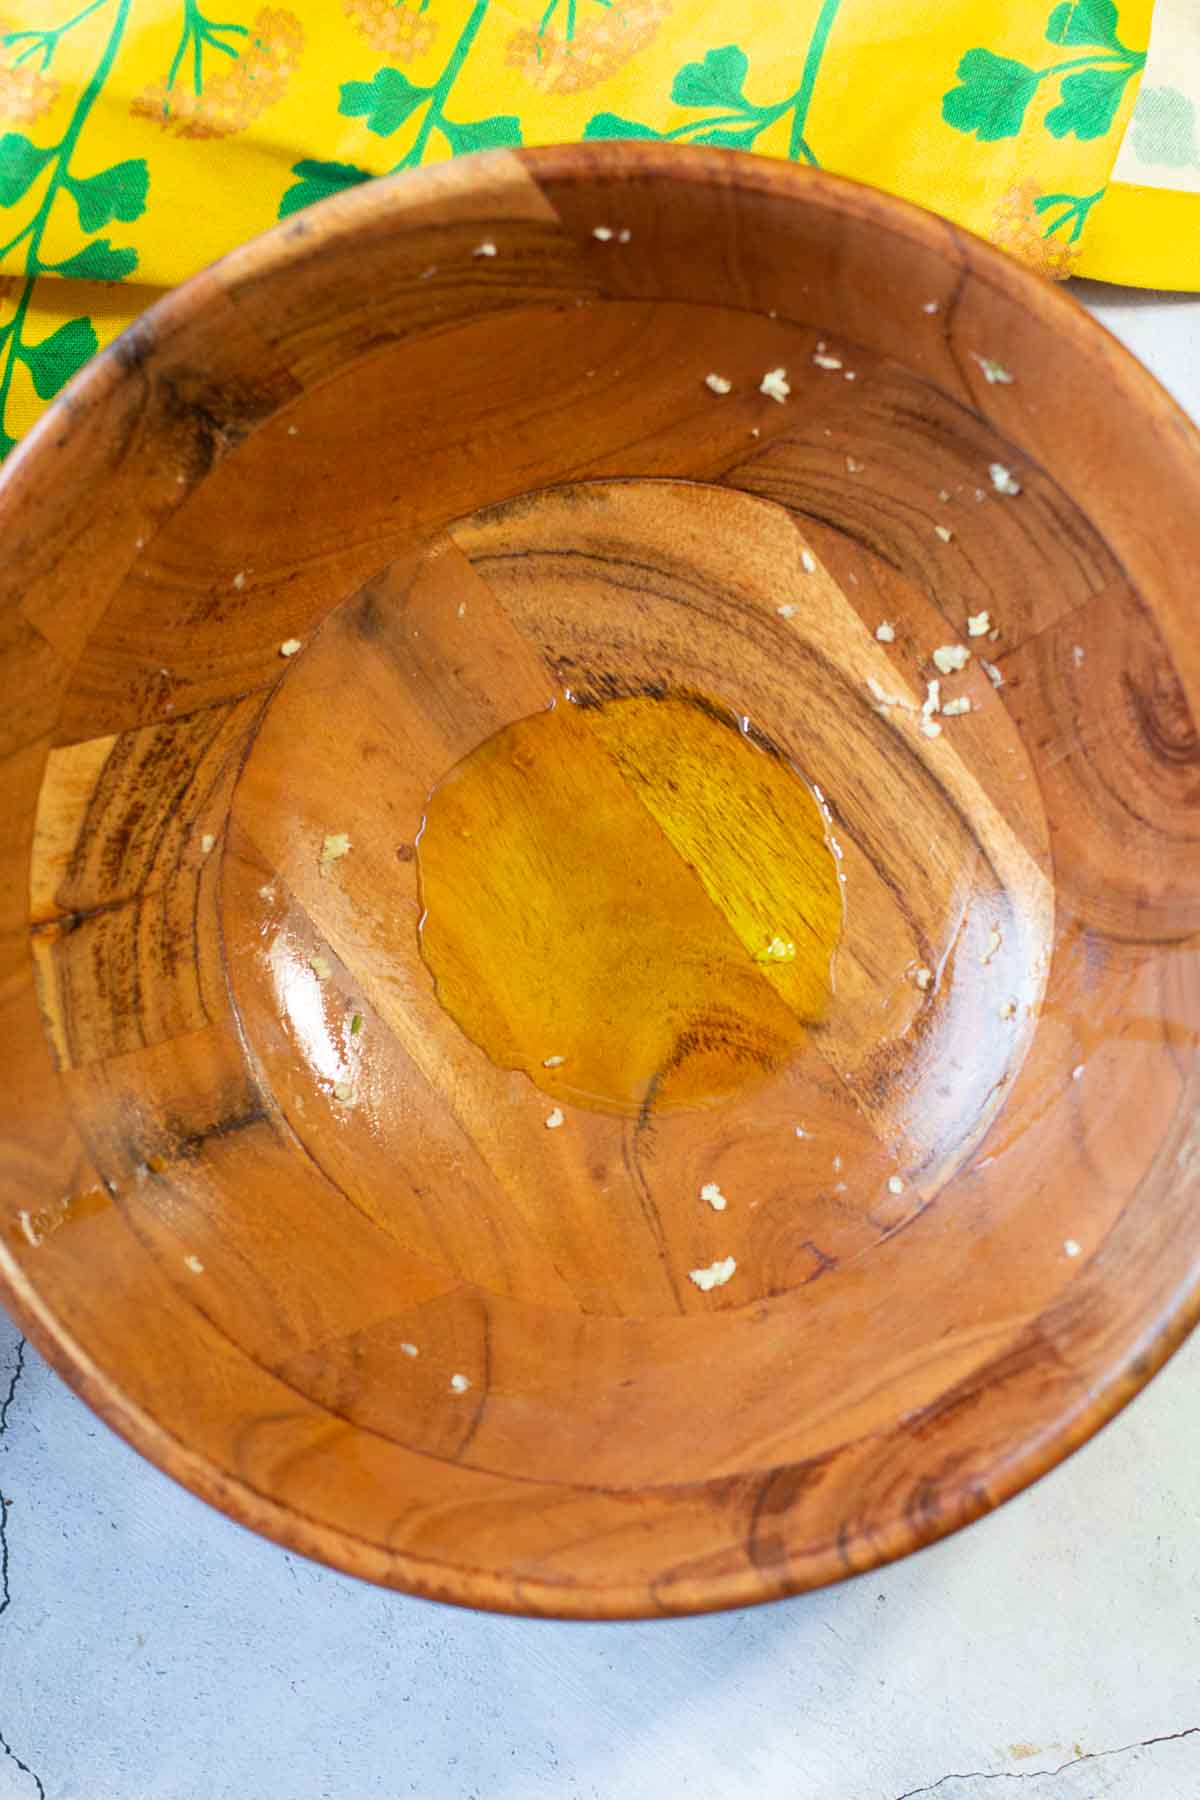 Spreading garlic on the sides of a wooden salad bowl.